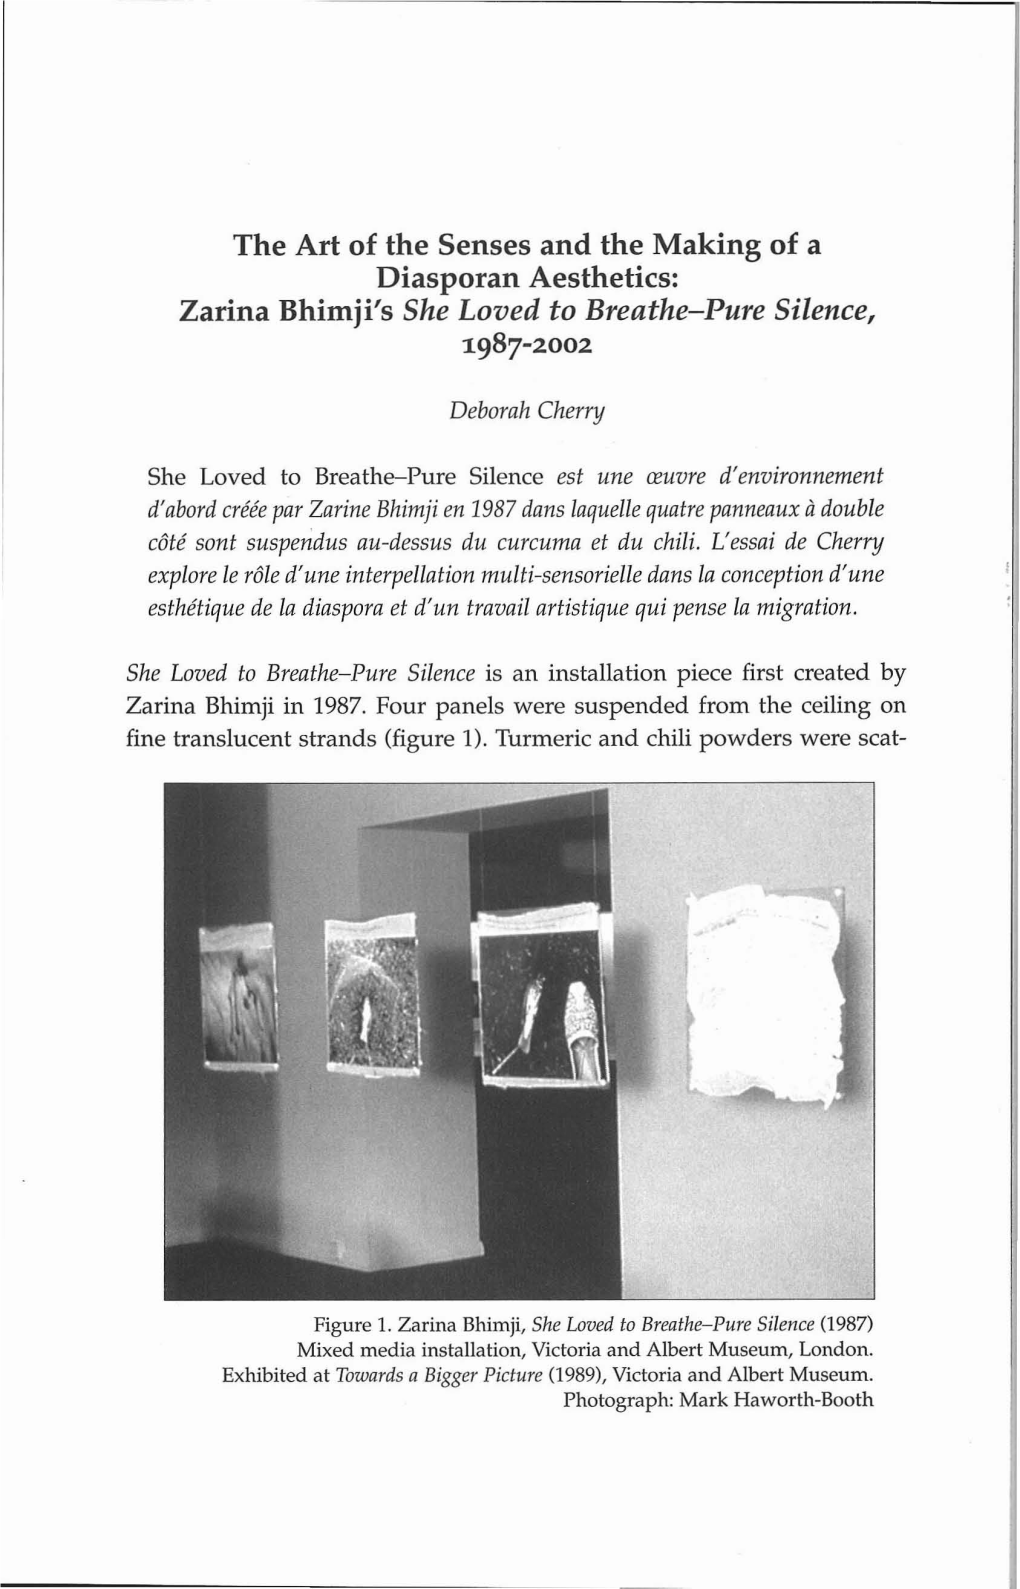 The Art of the Senses and the Making of a Diasporan Aesthetics: Zarina Bhimji's She Loved to Breathe-Pure Silence, 1987-2002